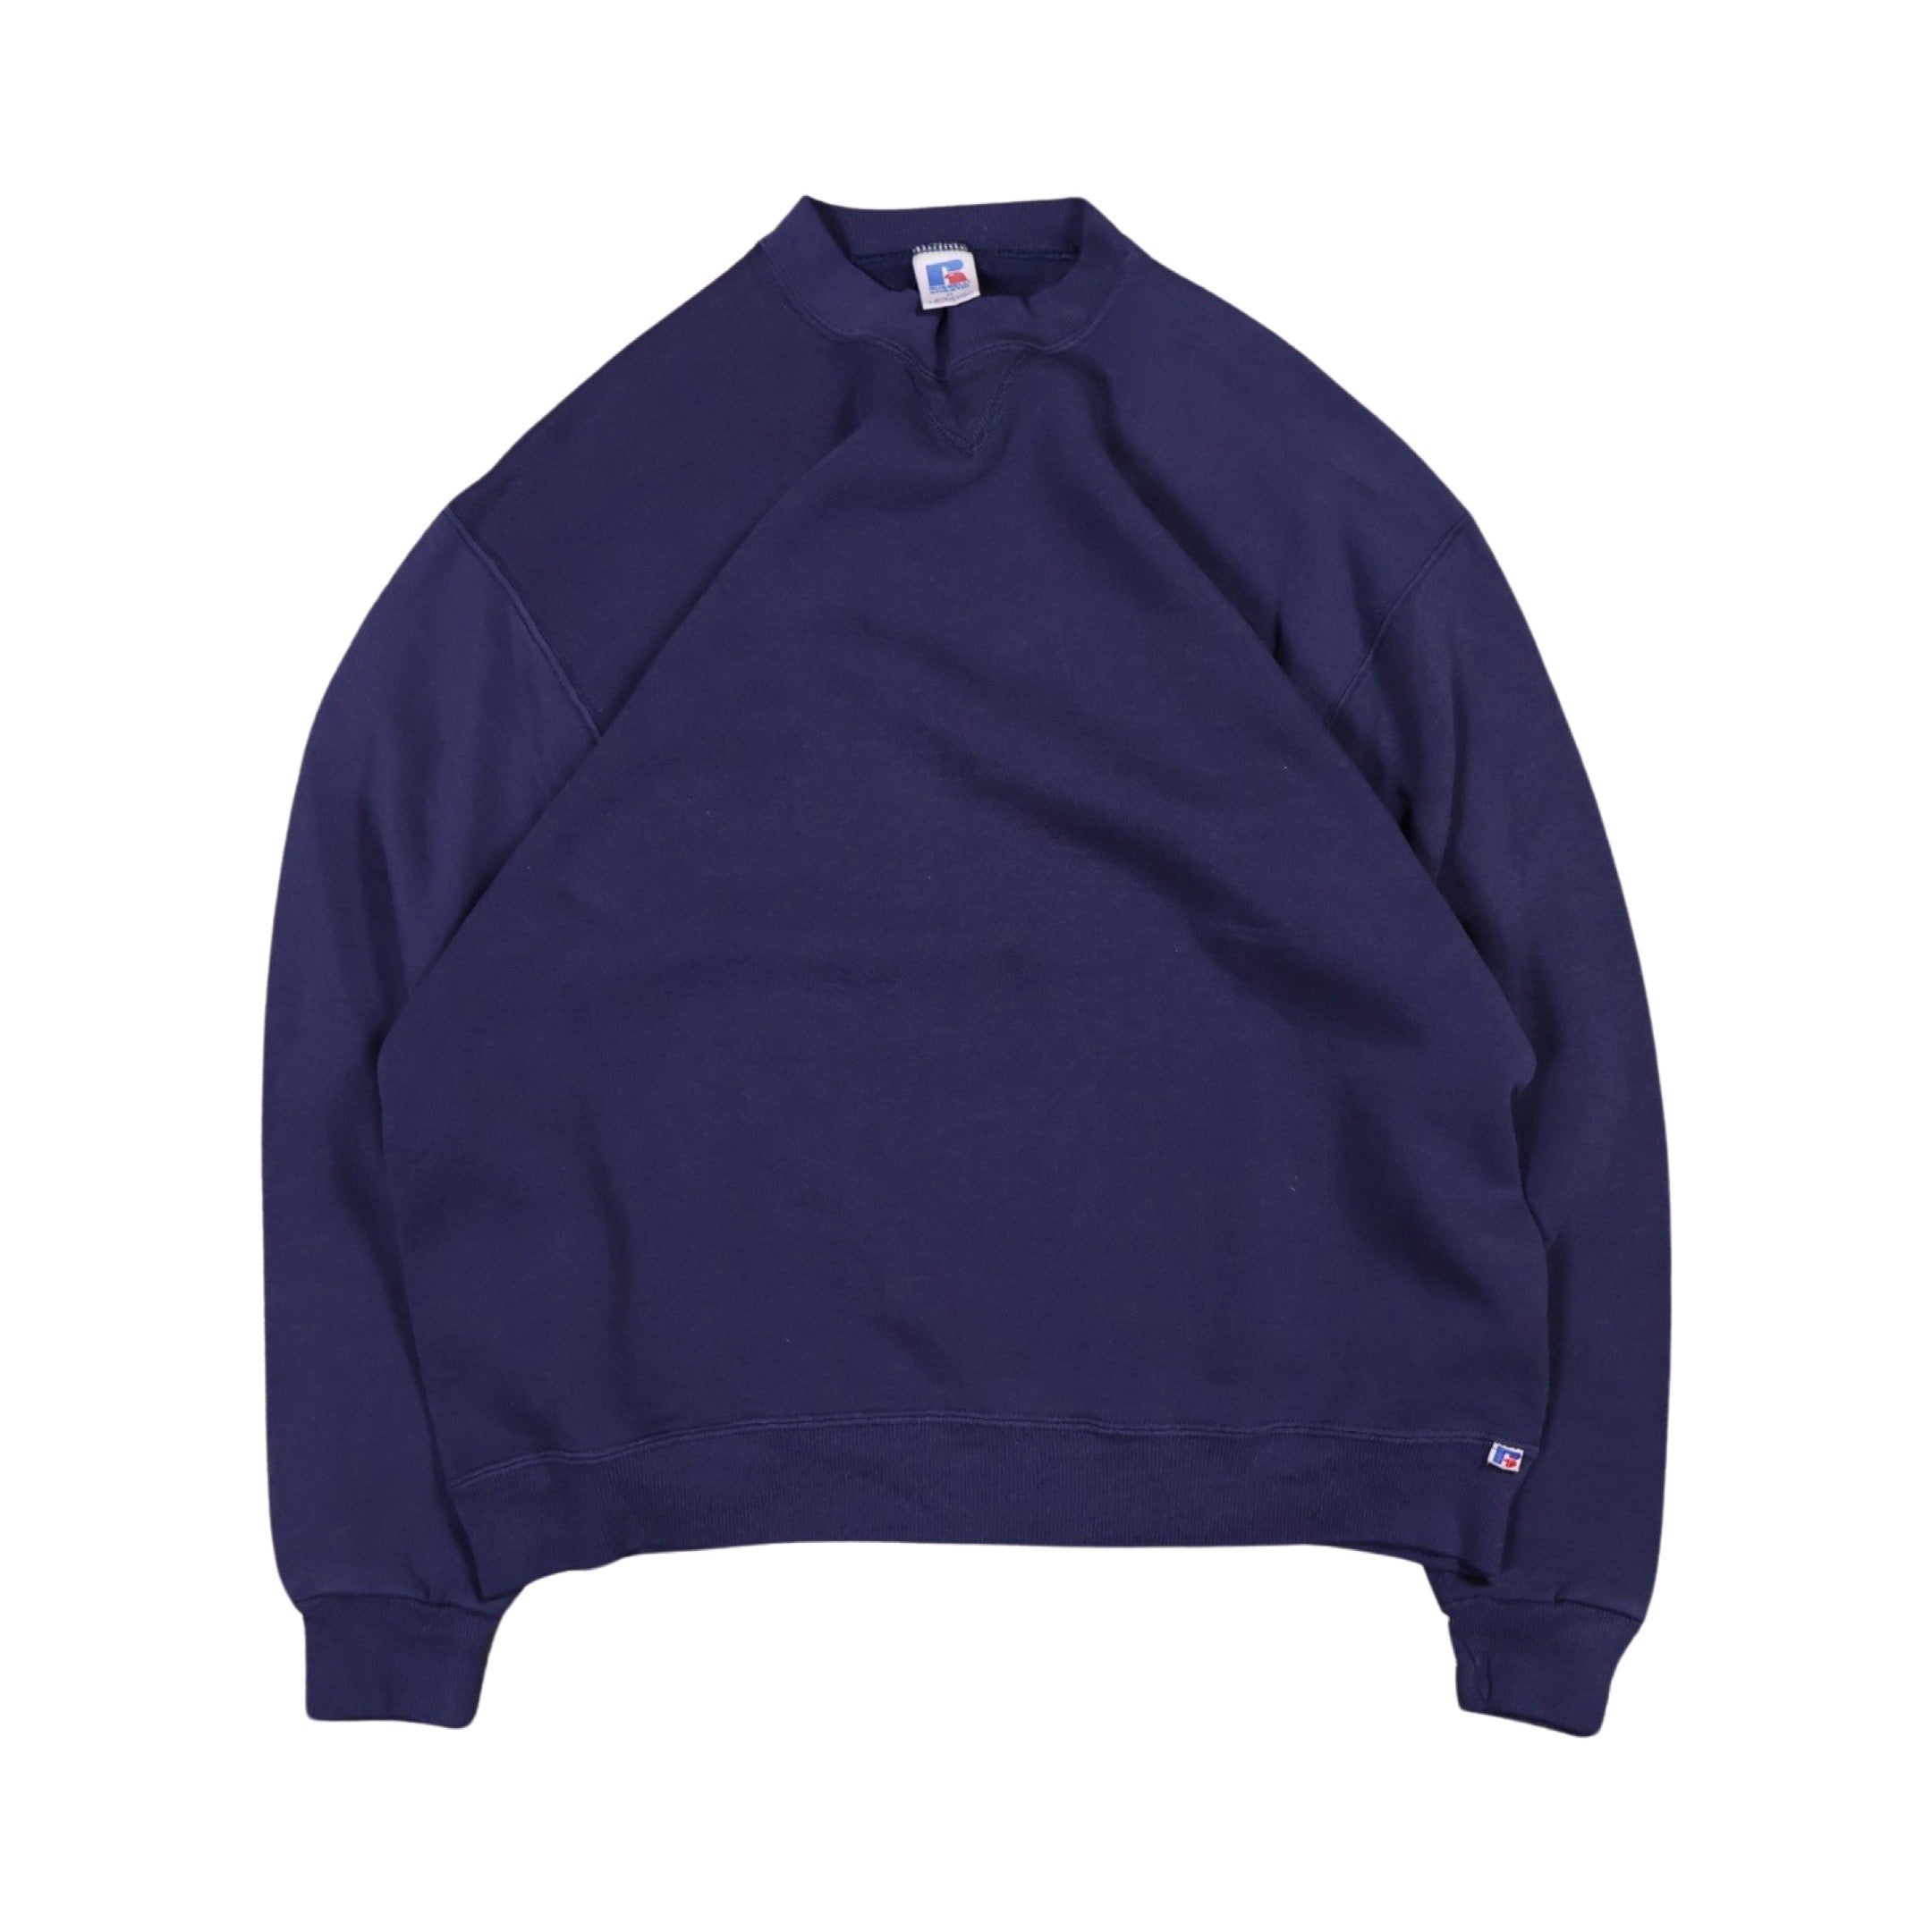 Navy 80s Russell Sweater Essential (Large)